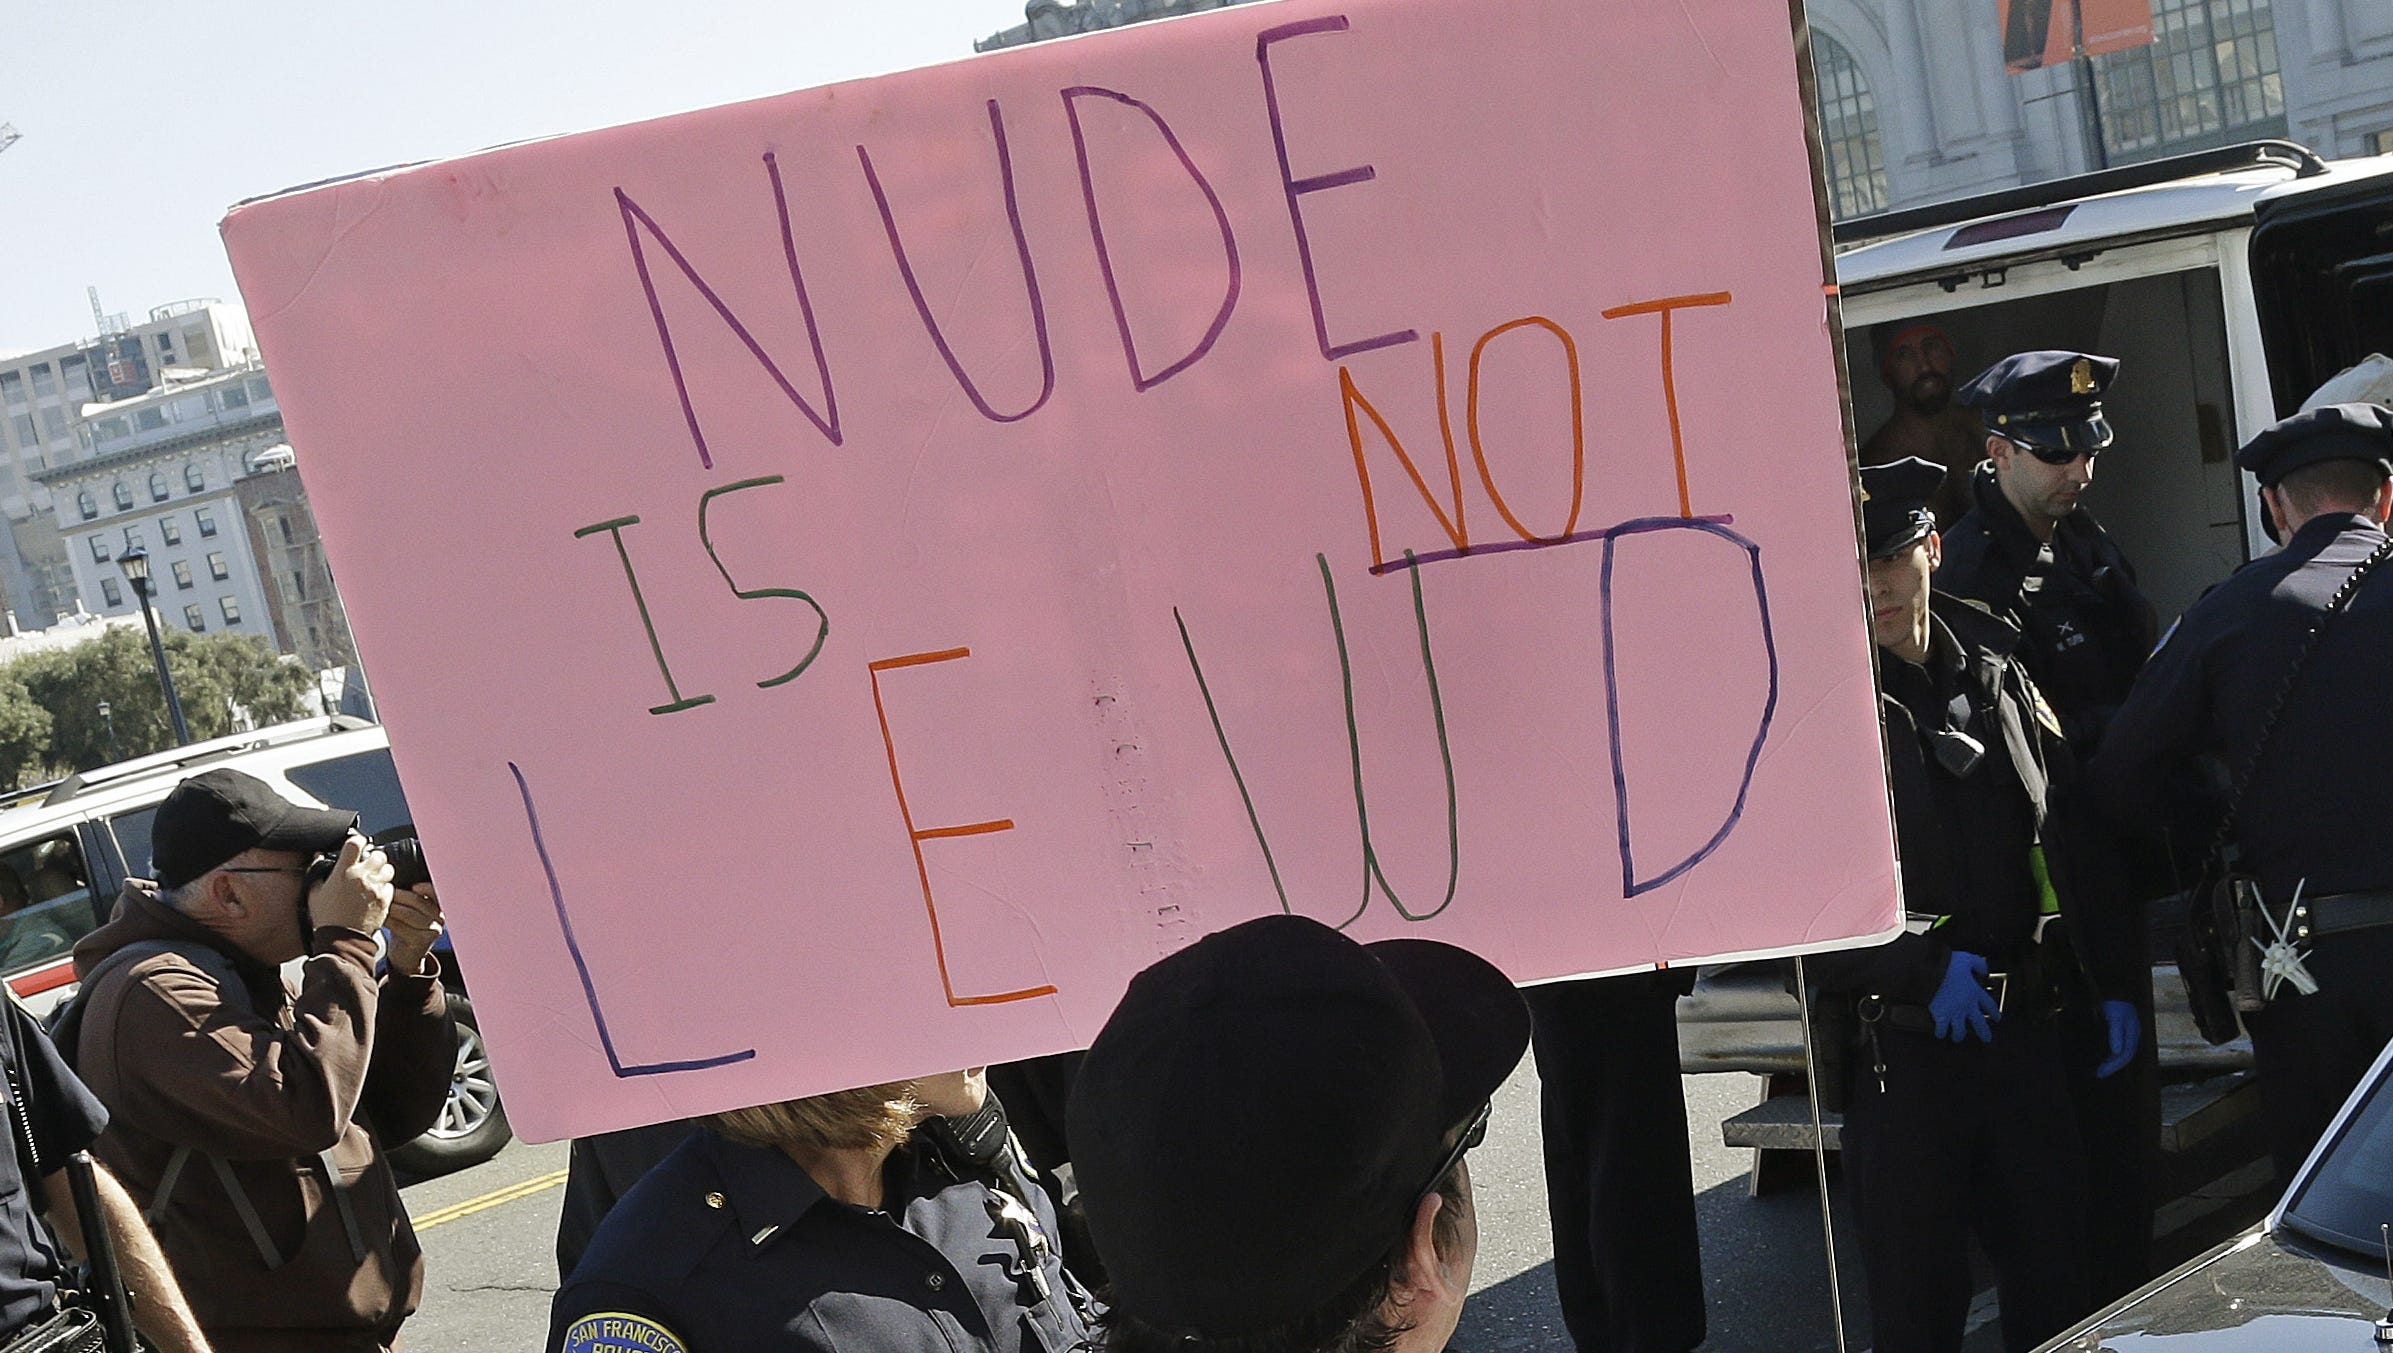 Public nudity on the rise forces ban in San Francisco